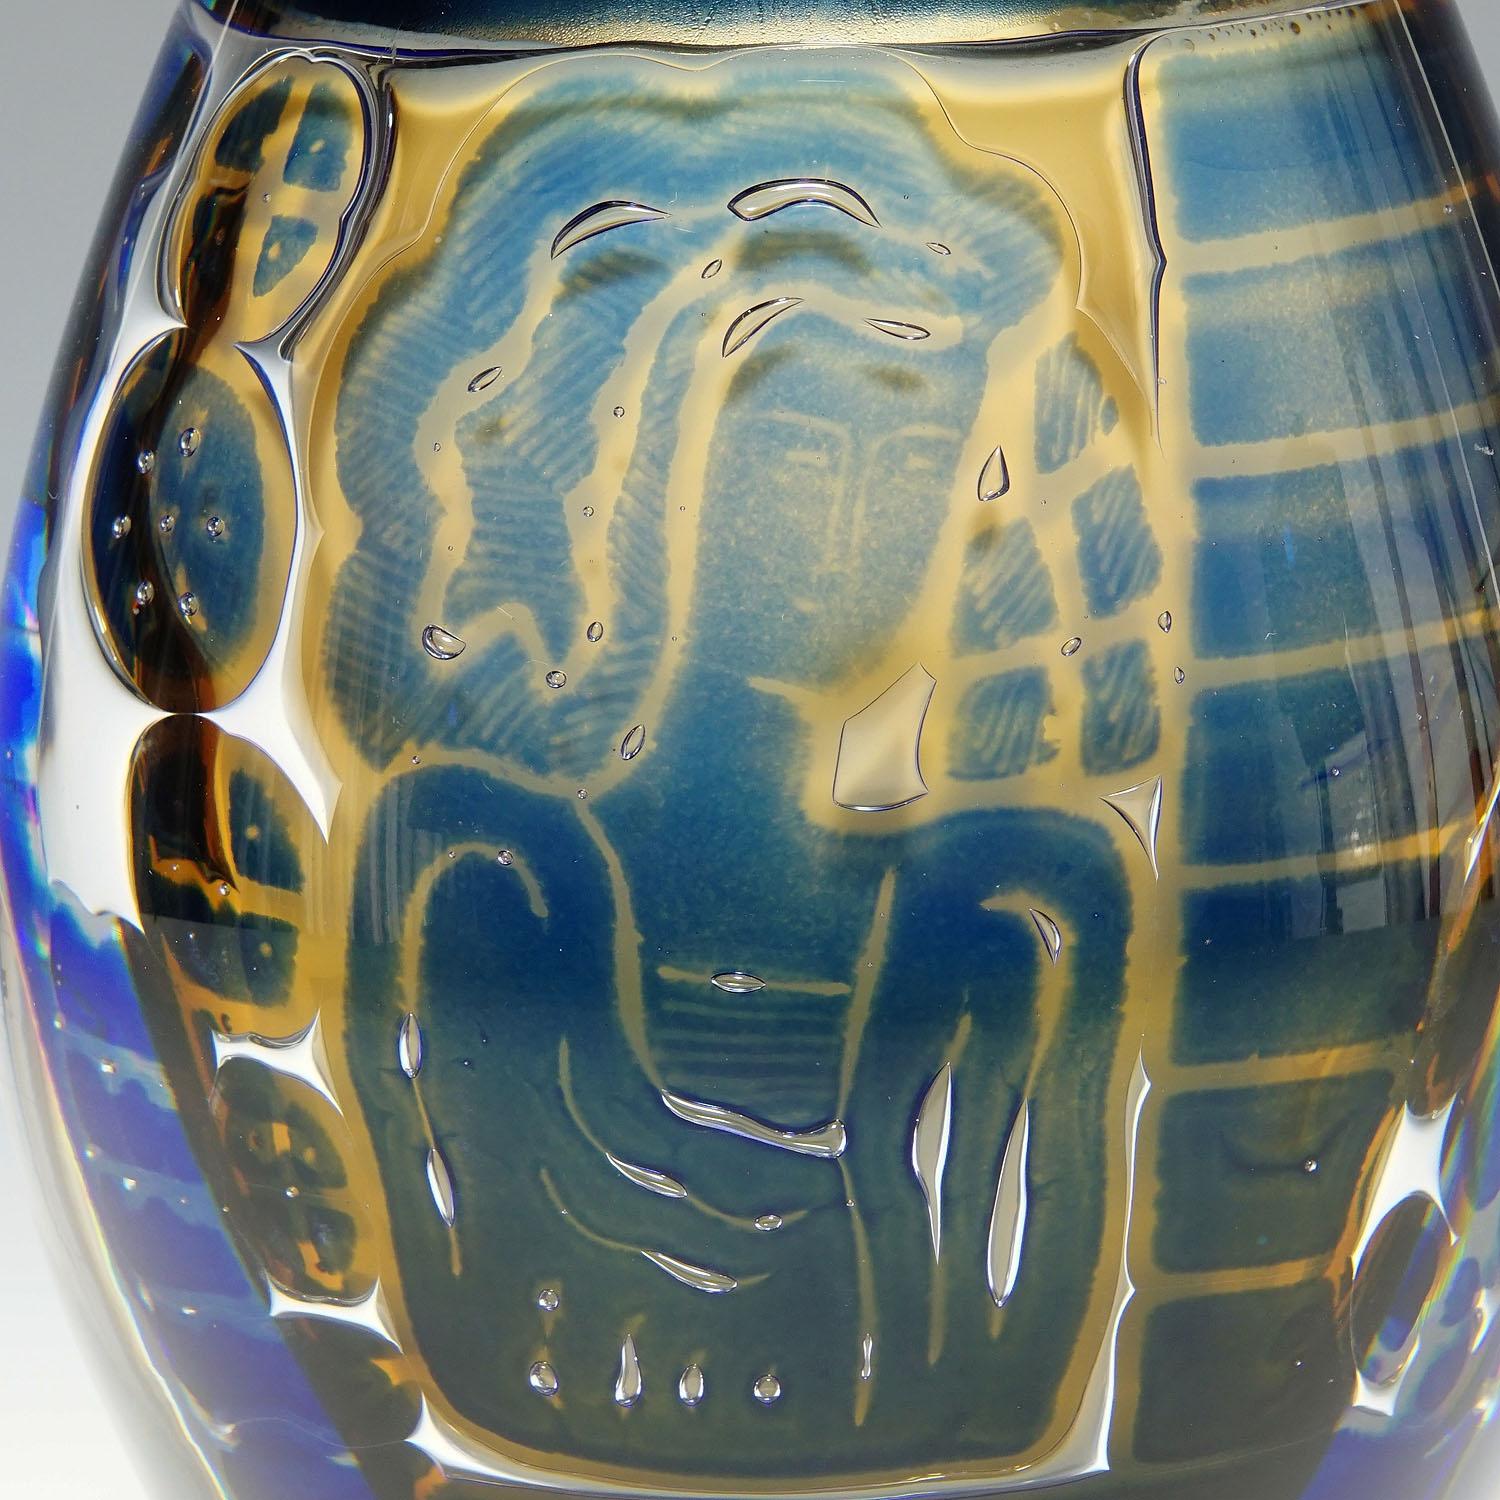 Ariel 'Gondoliere' Vase by Edvin Oehrstroem for Orrefors, Sweden, 1962 In Good Condition For Sale In Berghuelen, DE